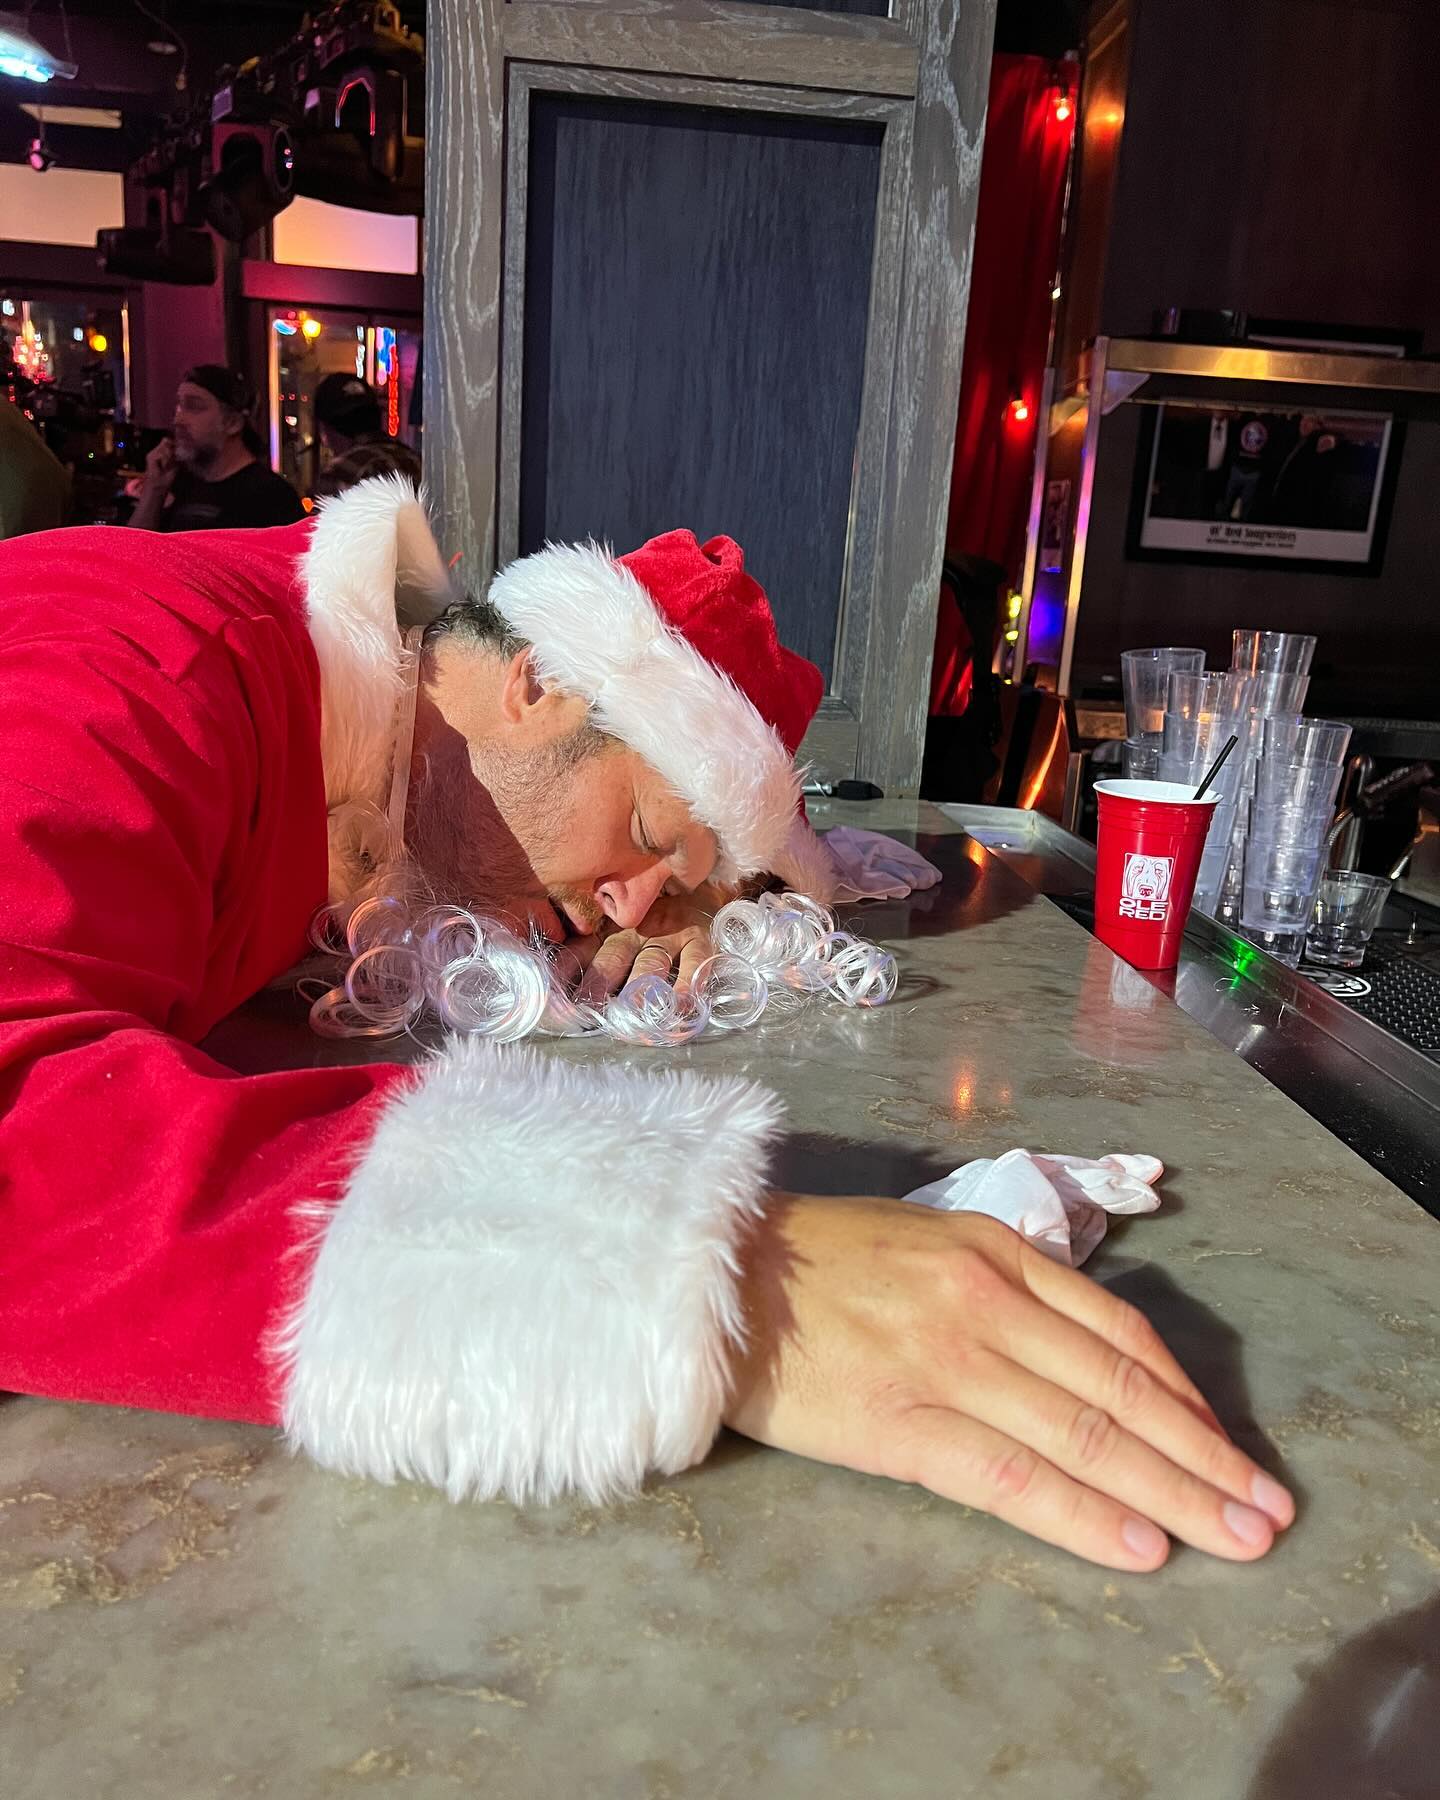 He was seen slumped against the counter in a Santa outfit at his Nashville bar